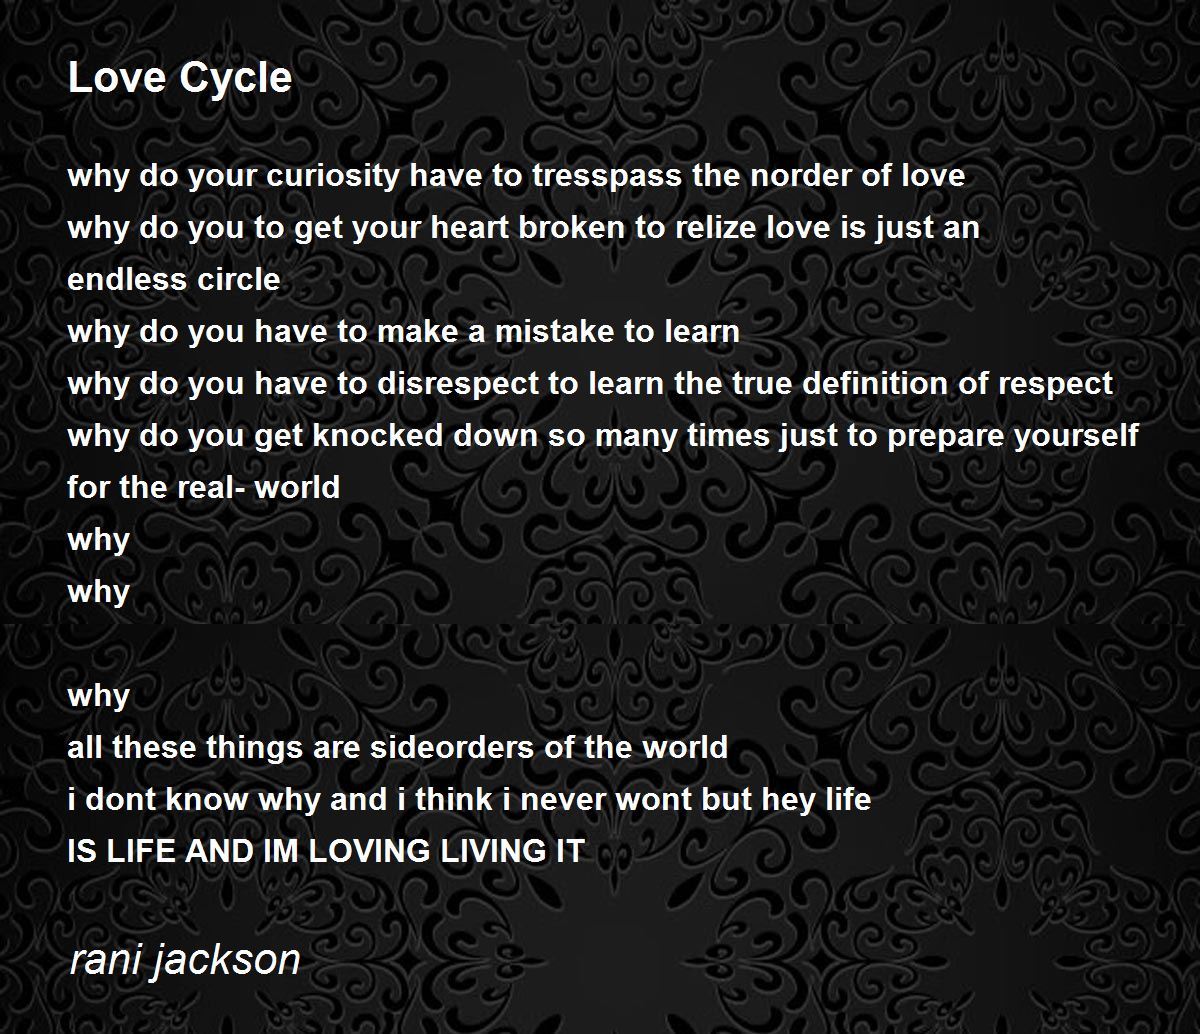 cycle of life love